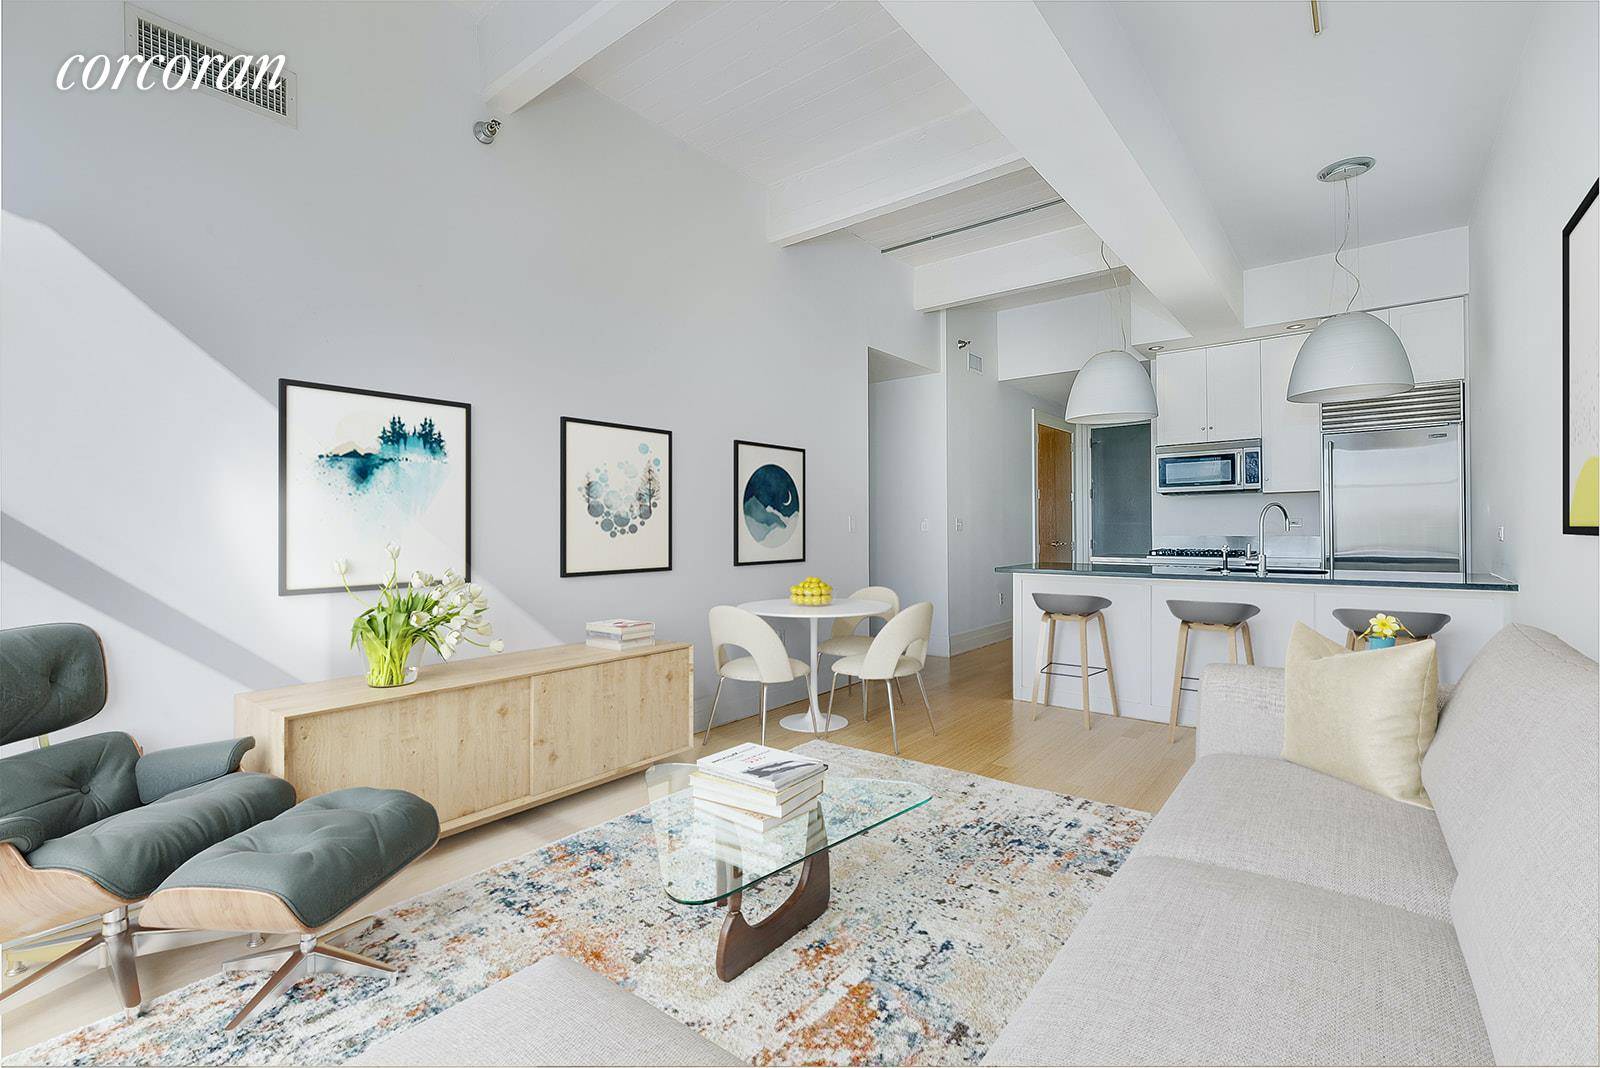 Authentic one bedroom loft offered for sale in one of DUMBO's most coveted condos, 70 Washington Street.